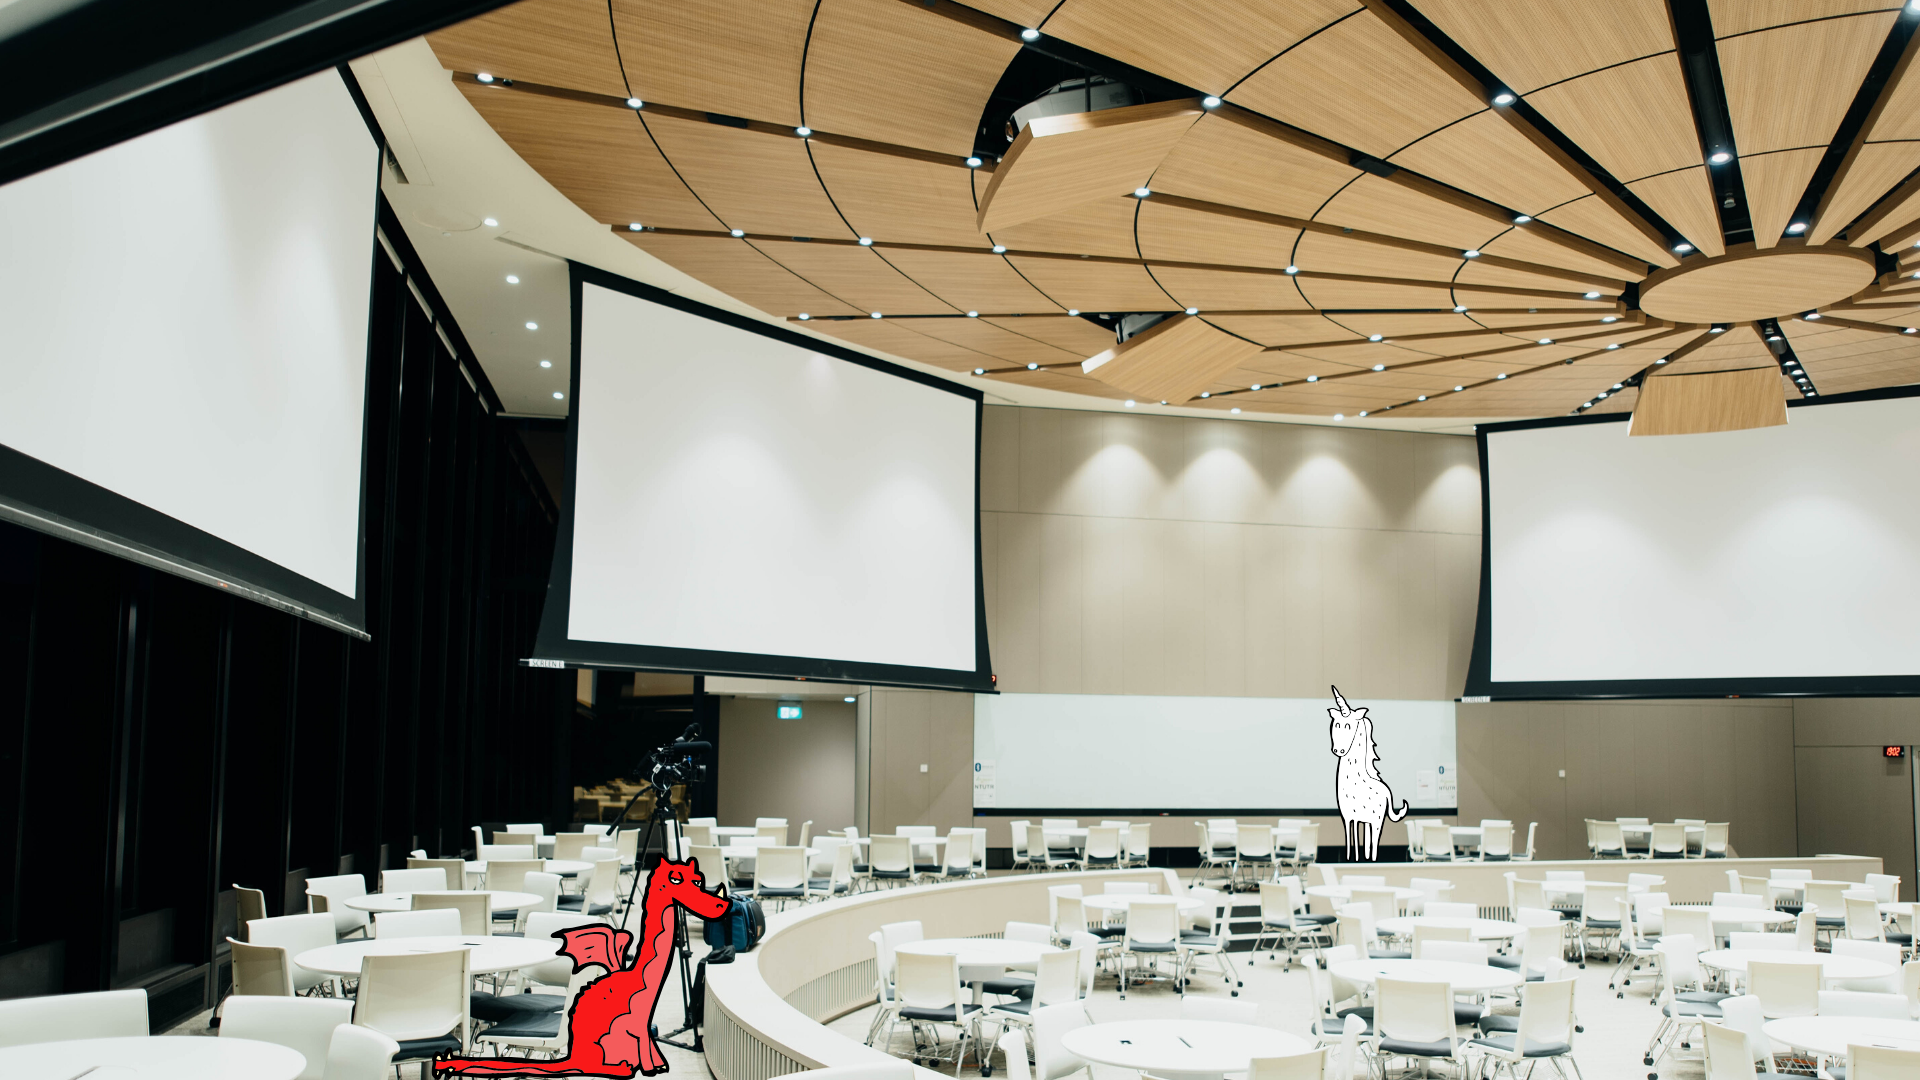 Empty auditorium with red dragon and white unicorn illustration